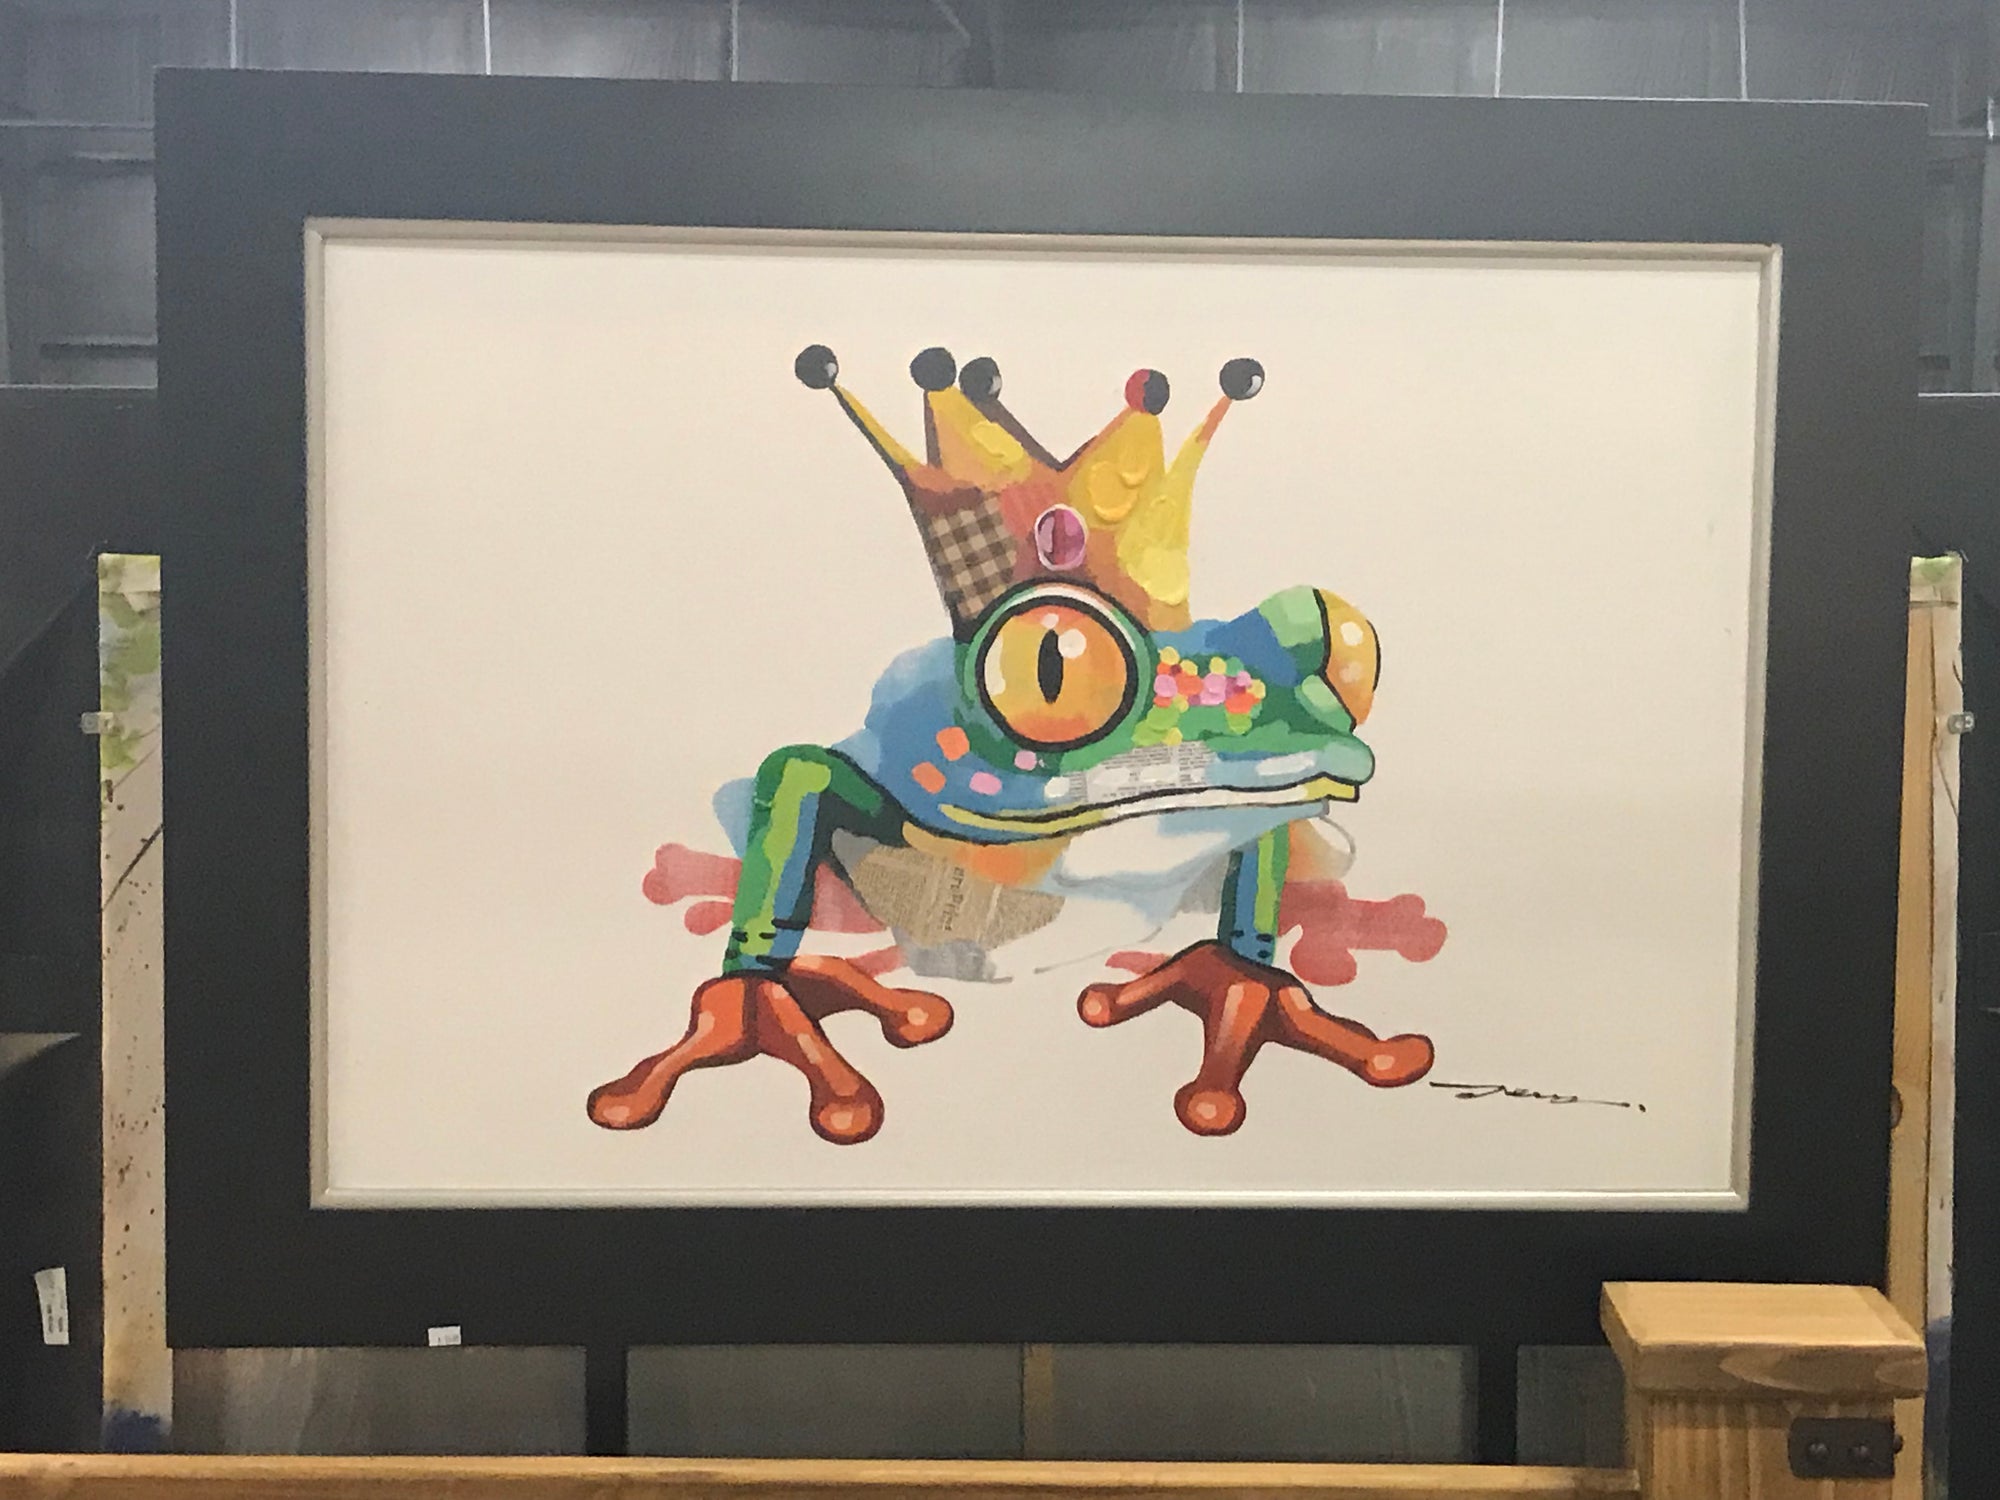 Mosaic Frog with Crown on Canvas in Frame